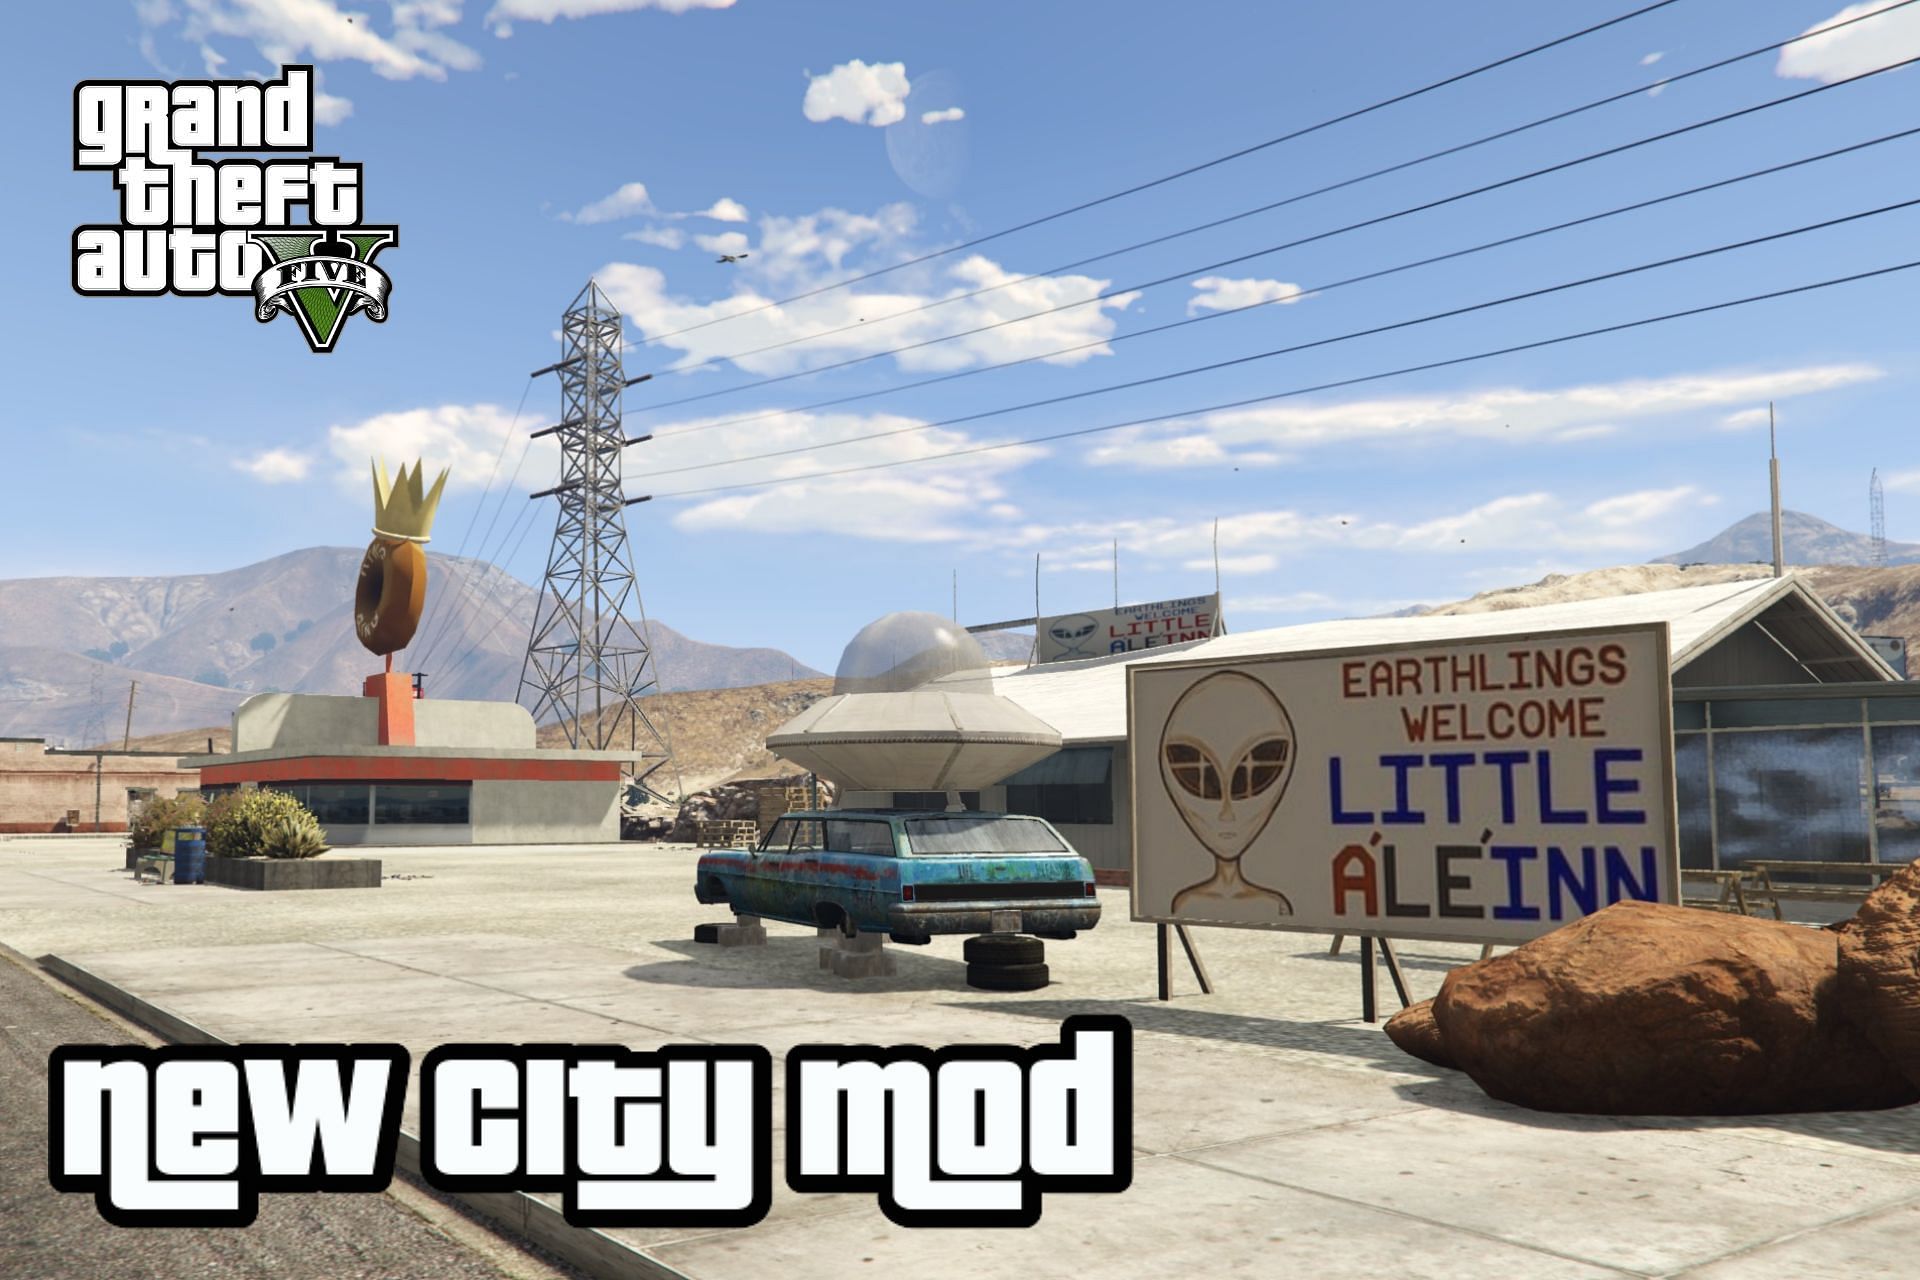 GTA 5 players should try this mod to visit Carson City from San Andreas (Image via GTA5-Mods)